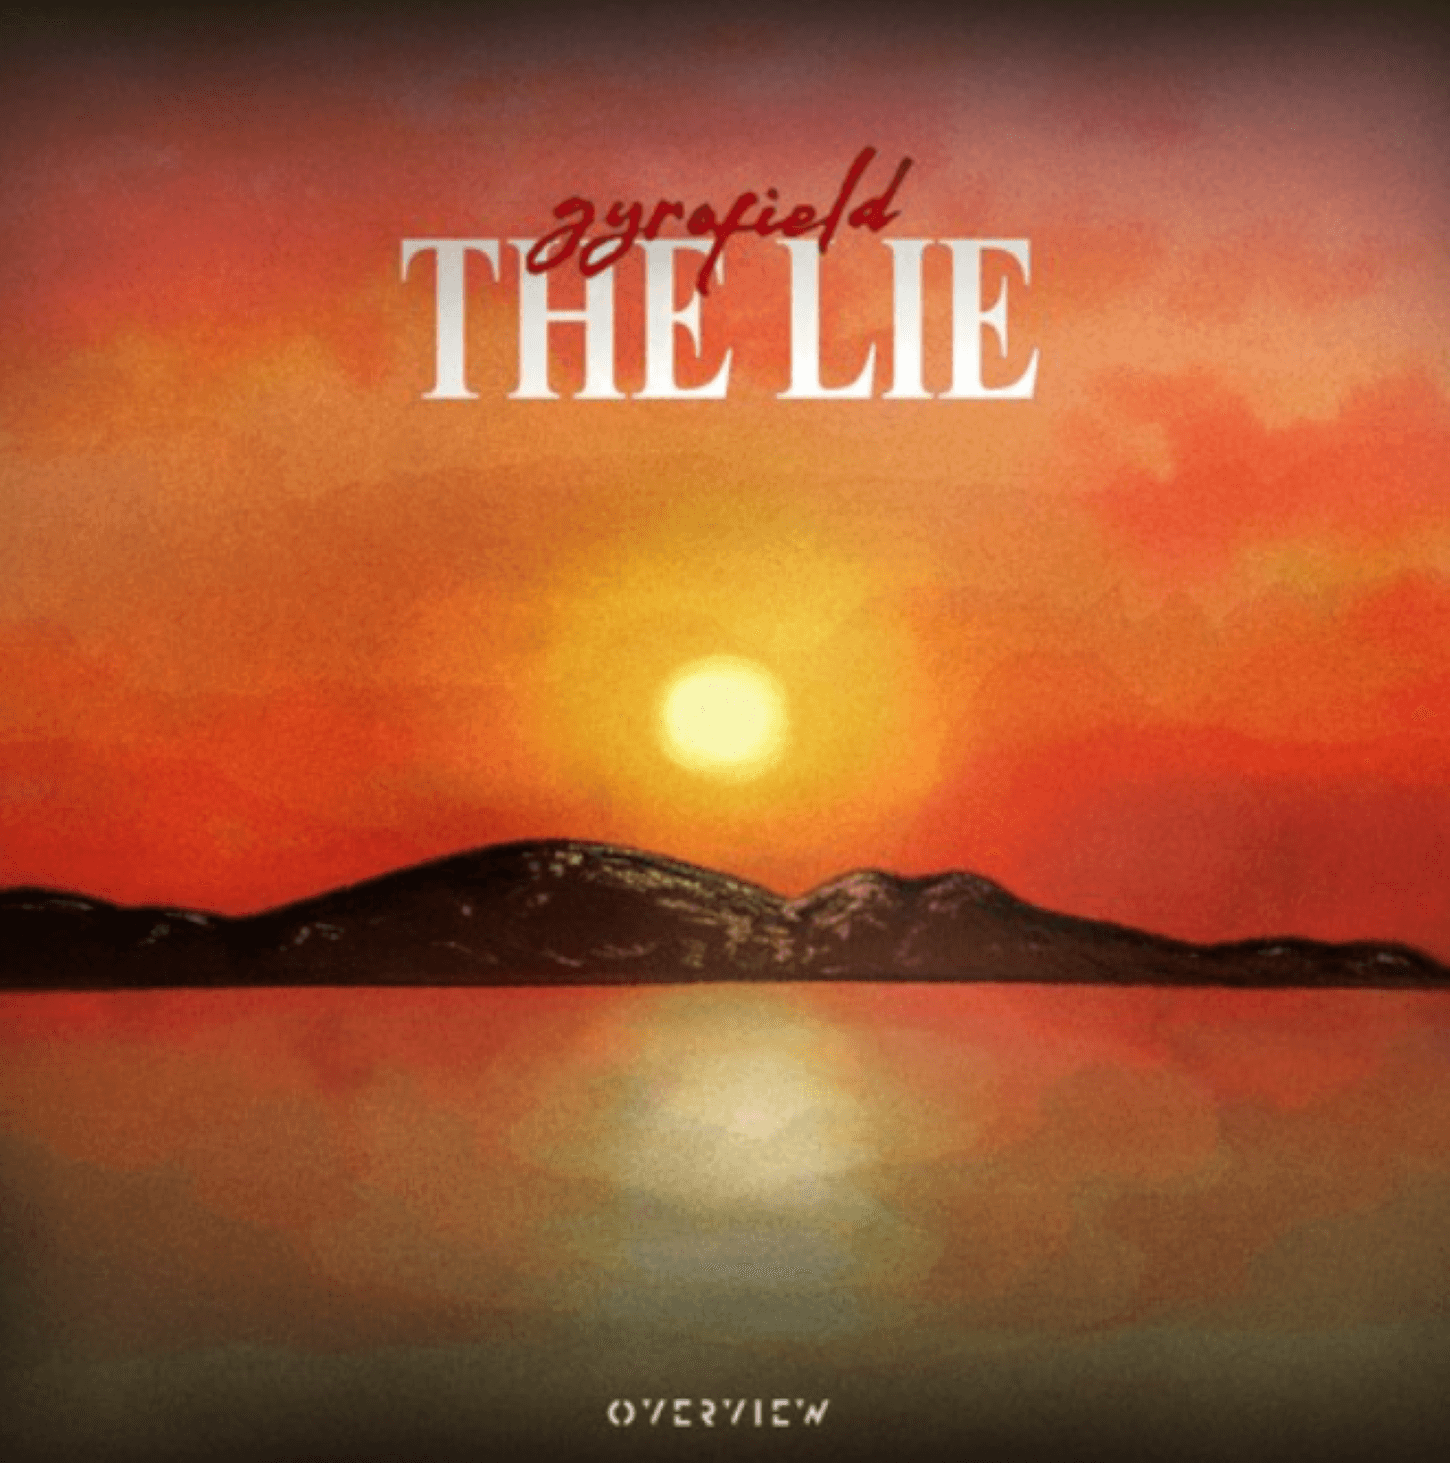 gyrofield Builds Hype for Upcoming EP with ‘The Lie’